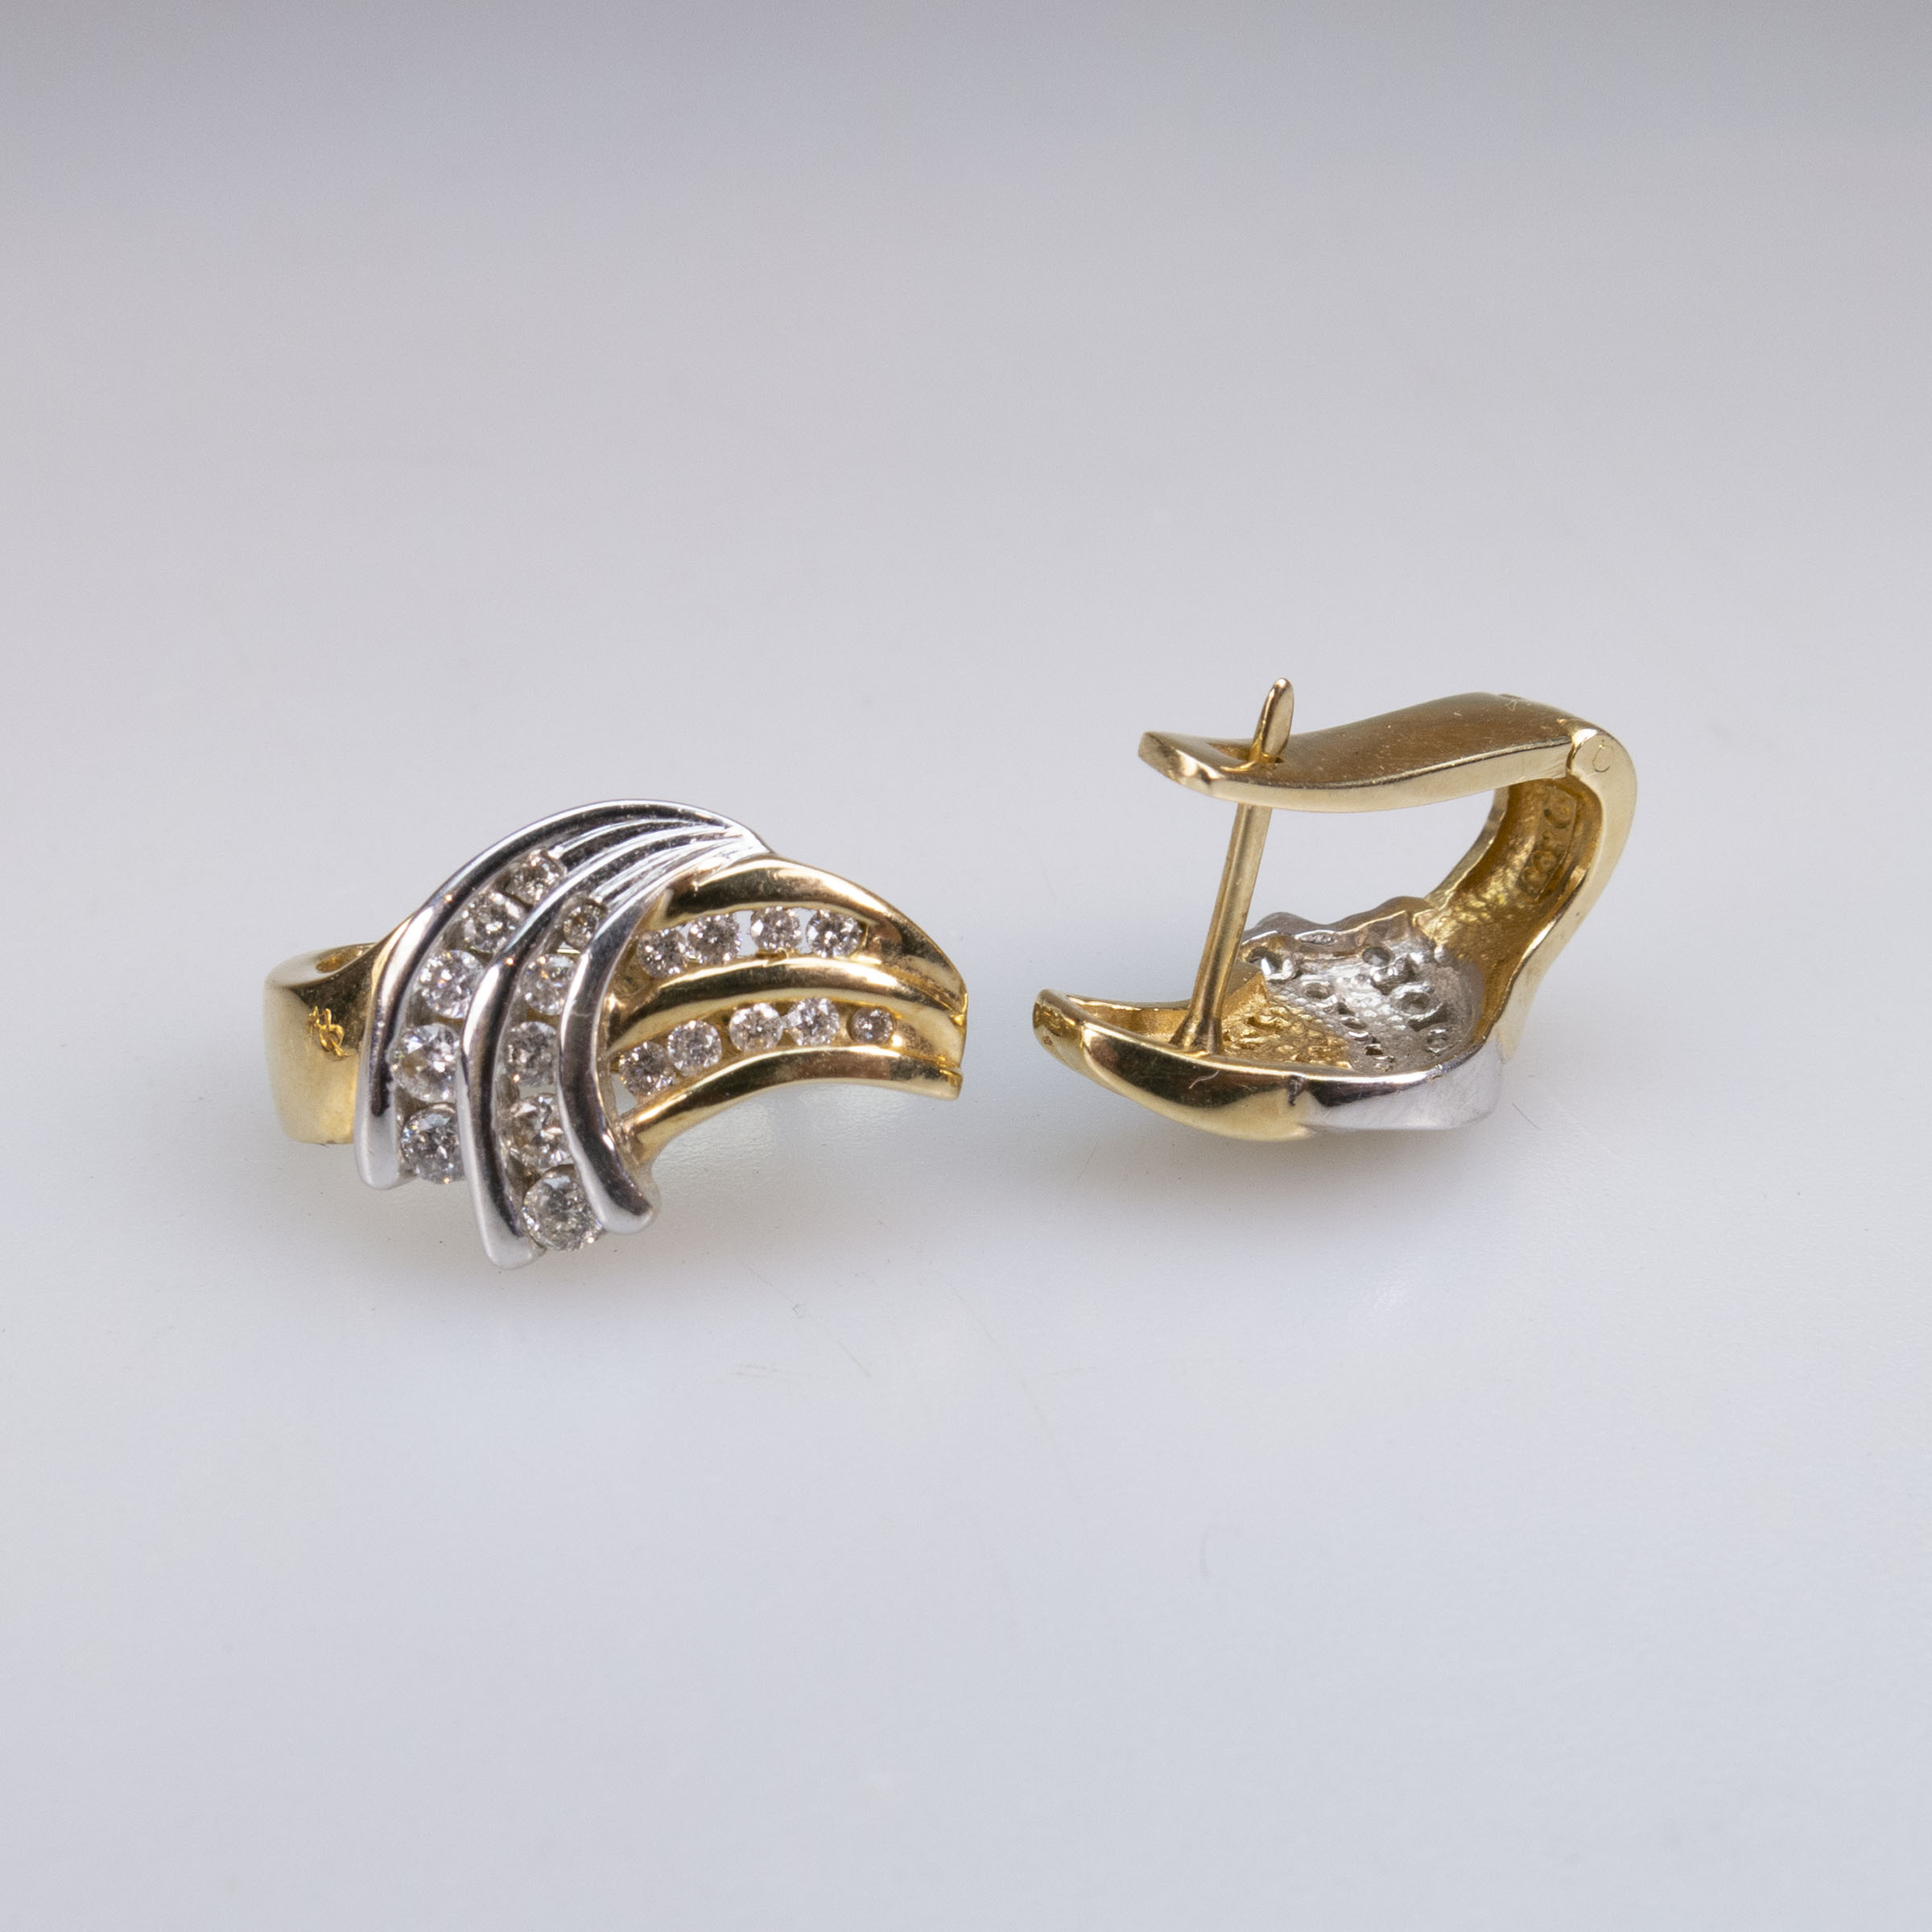 Pair of 14k Yellow And White Gold Earrings